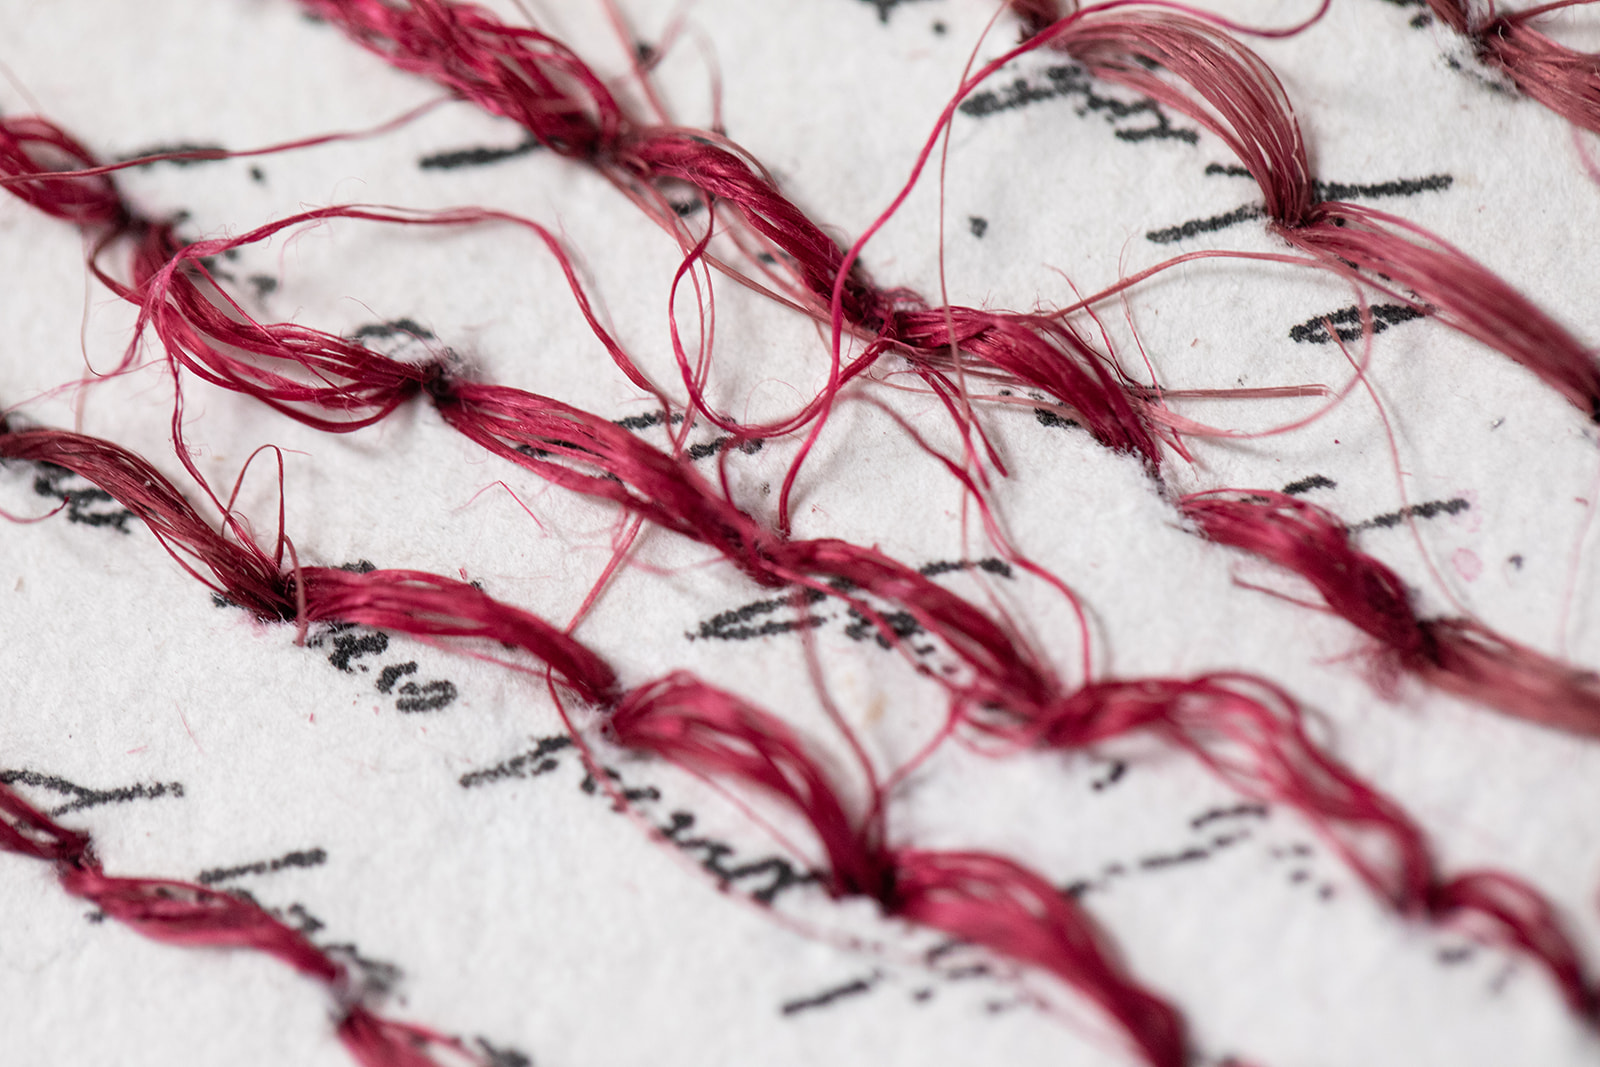 Close-up view of dark red thread sewn through lines of cursive text